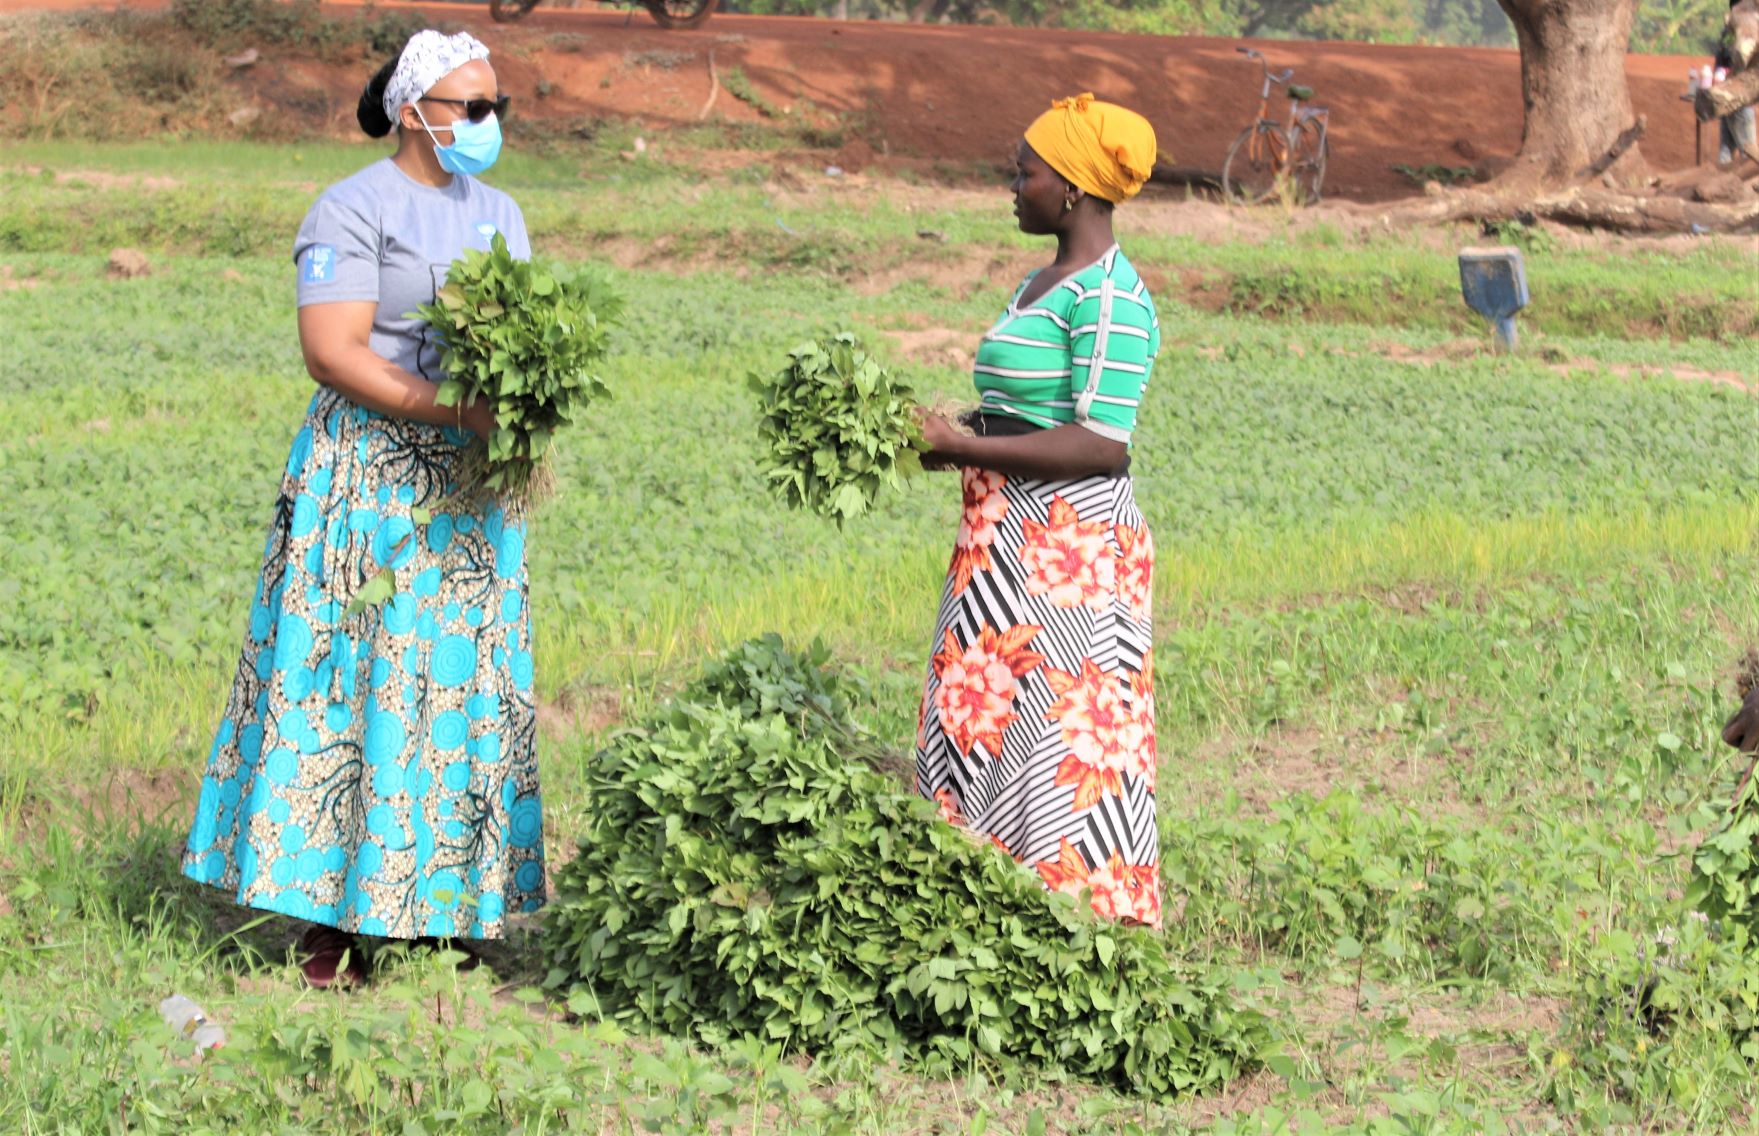 Empowering women in climate action with alternative livelihood options